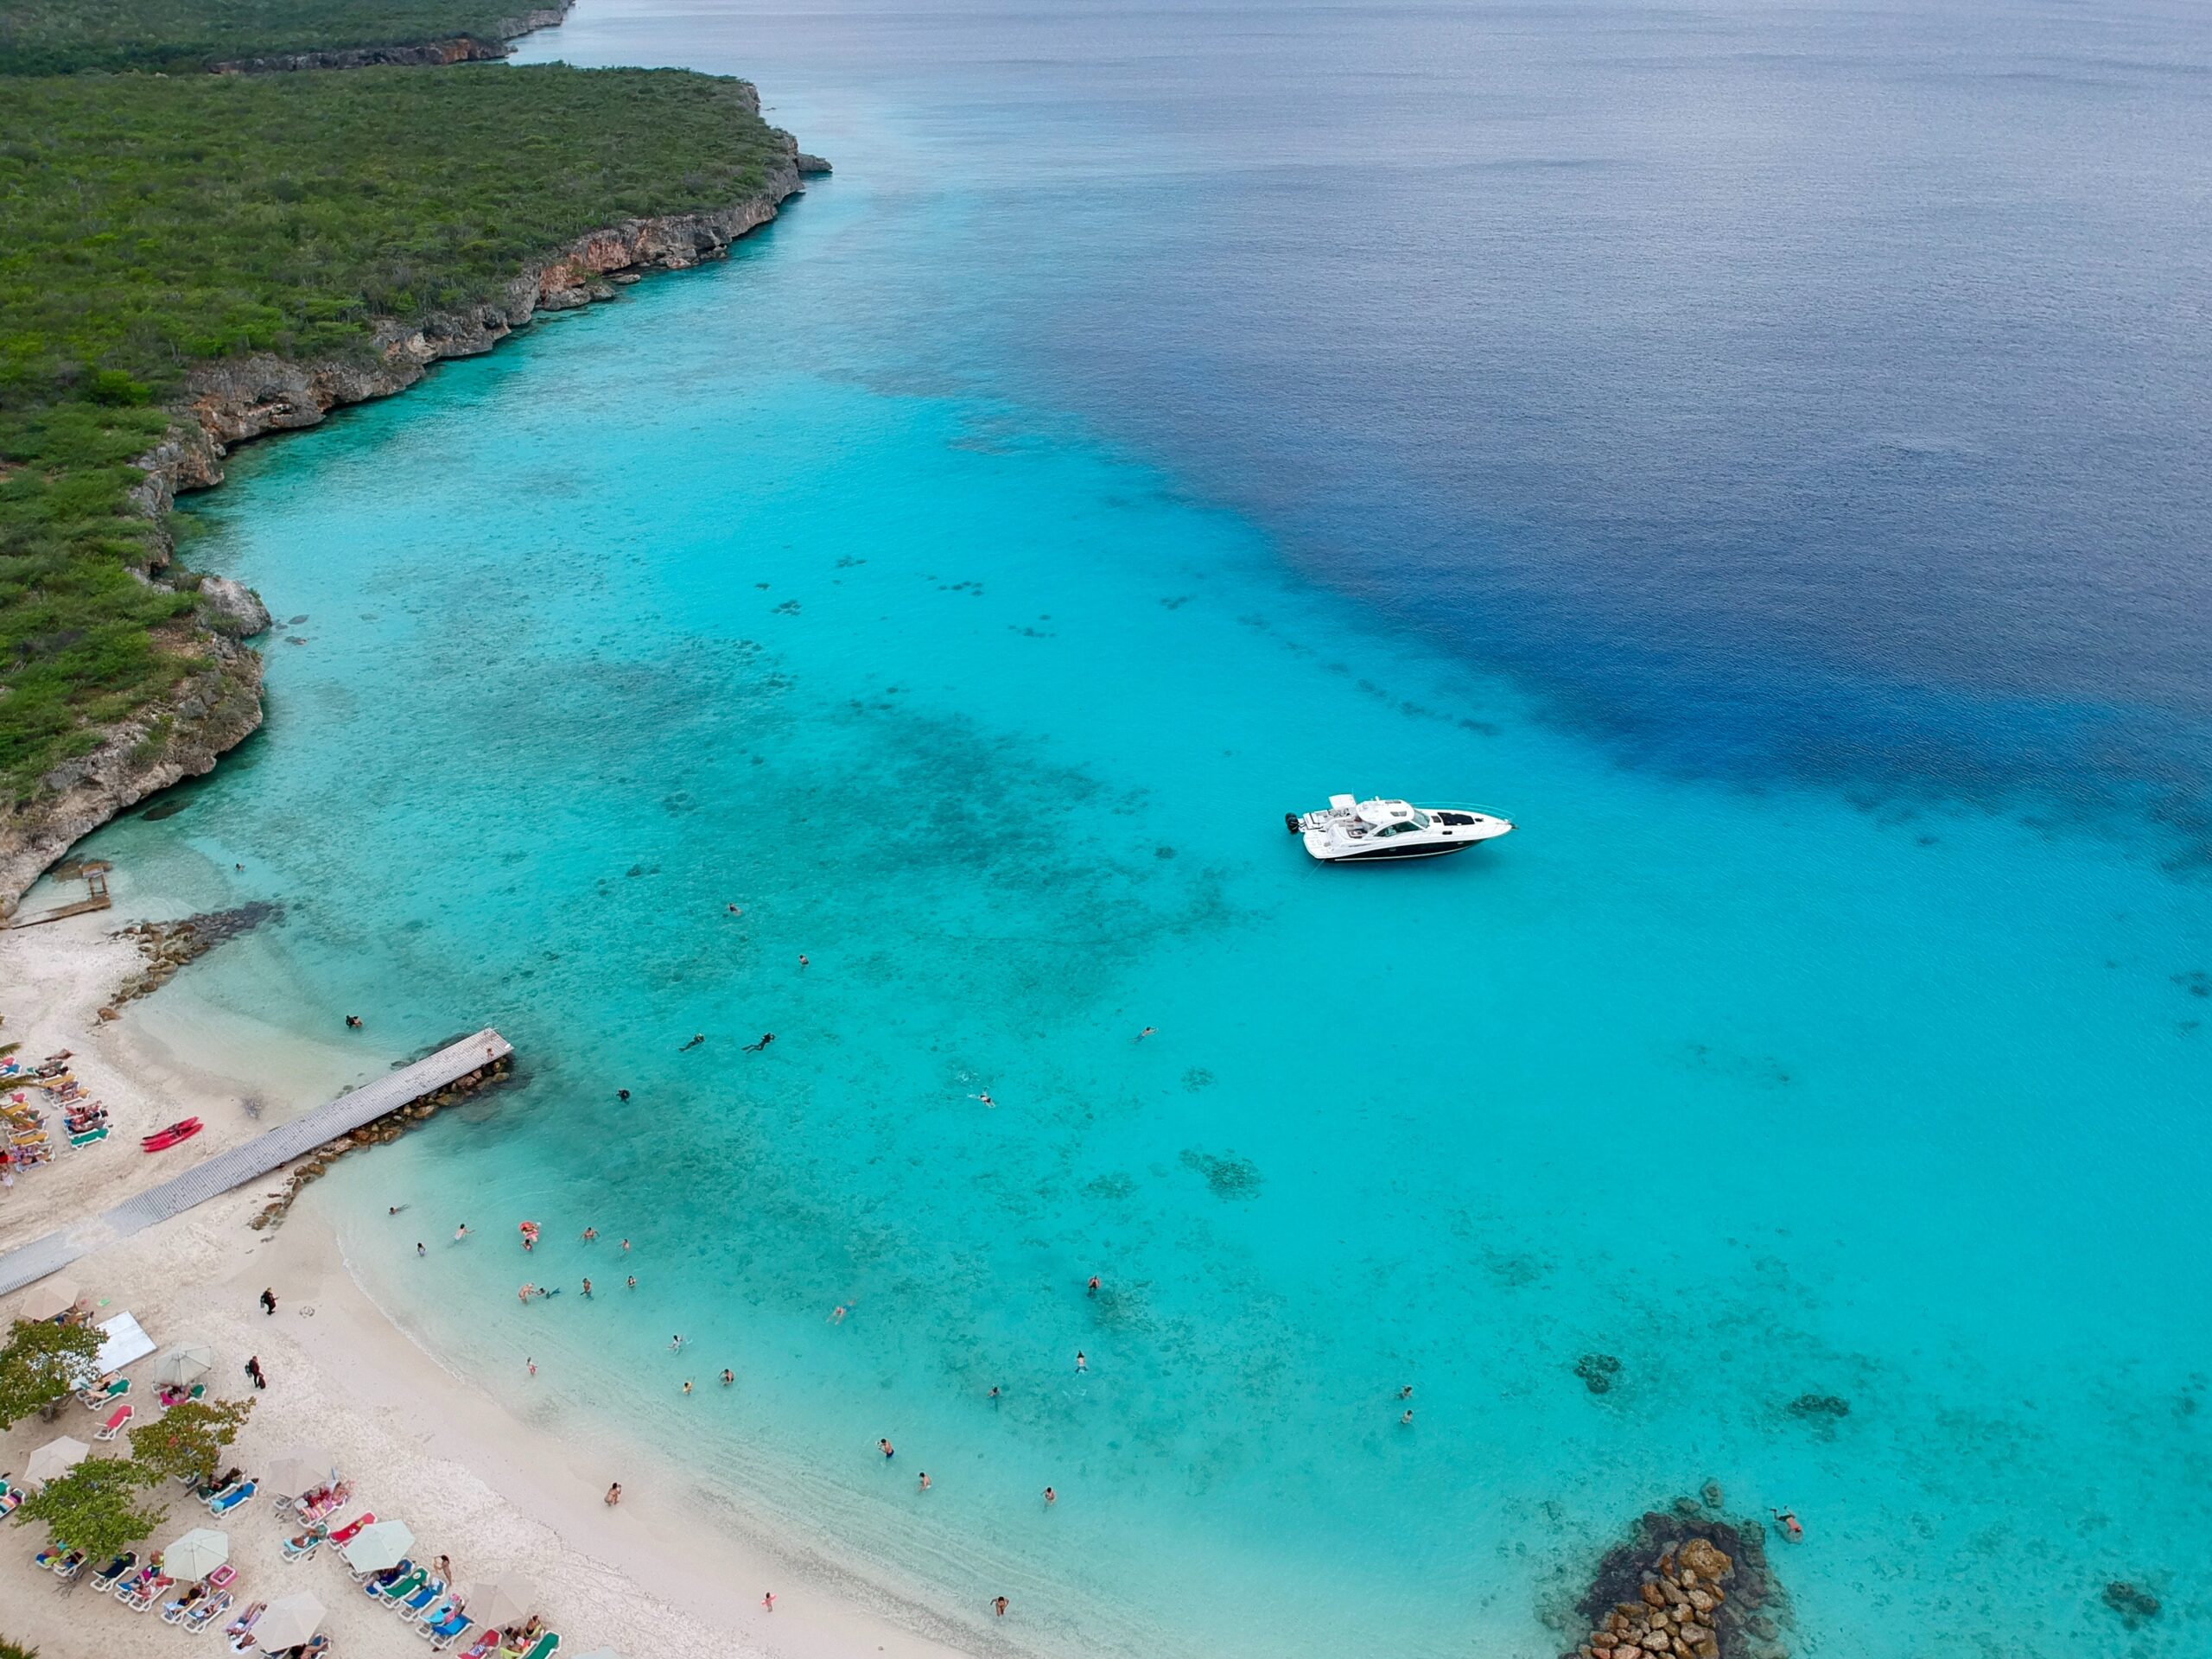 Curaçao is a unique Caribbean island that can be the perfect tropical destination for an upcoming trip. Learn more about the thriving culture and safety level of the island. 
pictured: one of Curaçao's coast lines with people enjoying boating and beach fun 